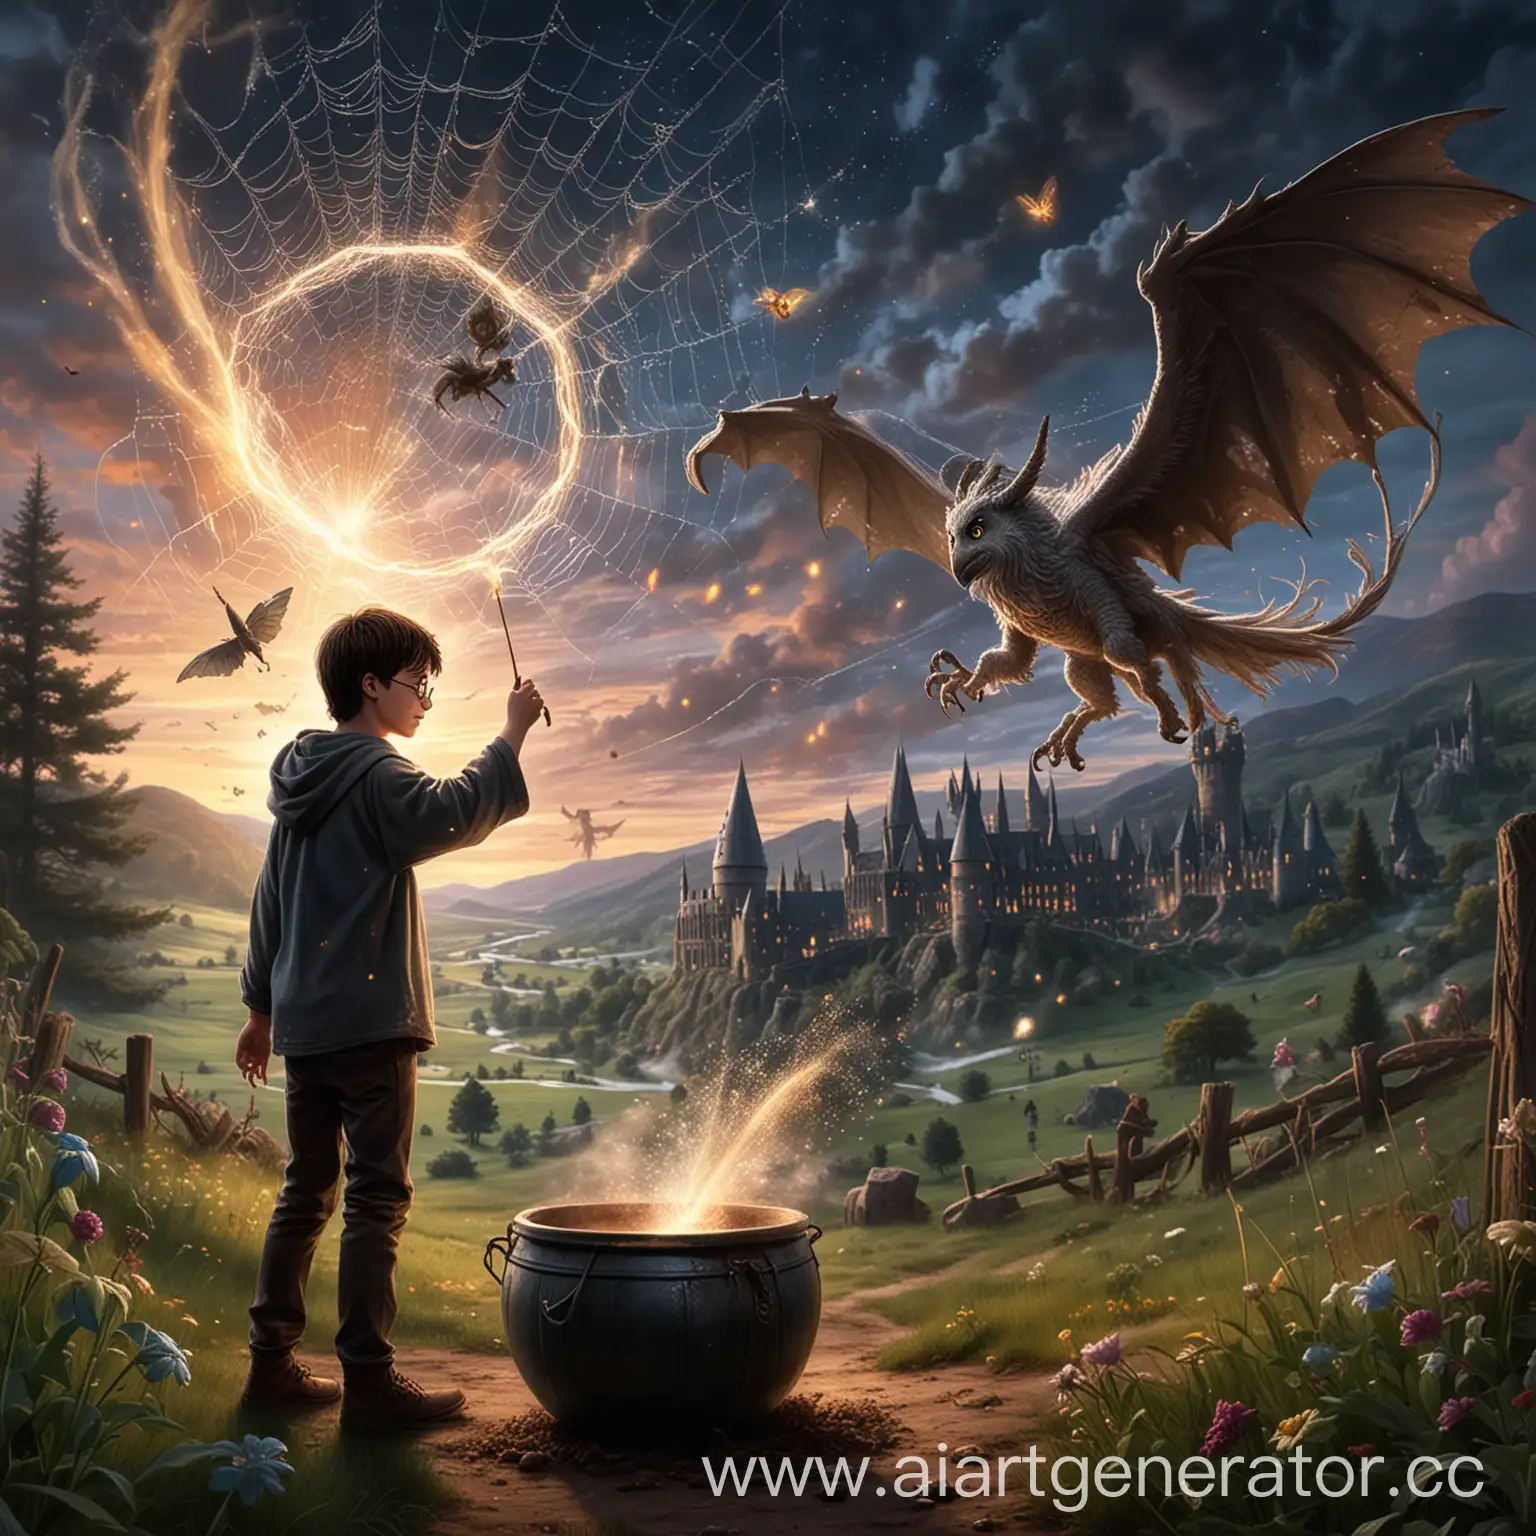 Magical-Scene-with-Harry-Potter-Fairy-Dragon-Owl-and-Unicorn